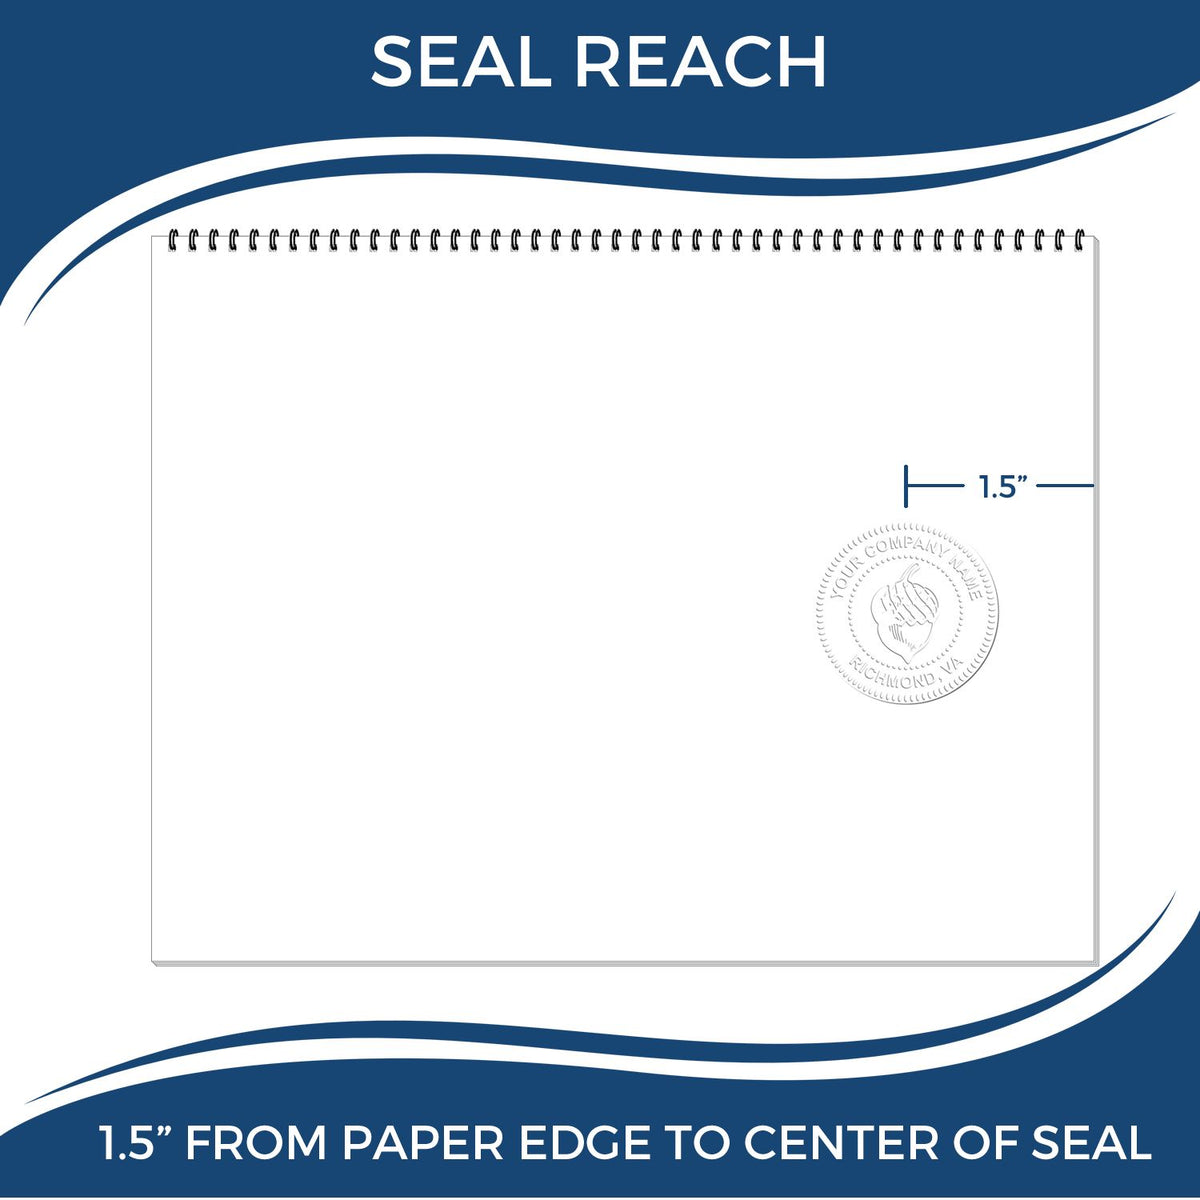 An infographic showing the seal reach which is represented by a ruler and a miniature seal image of the Soft Pocket Kentucky Landscape Architect Embosser